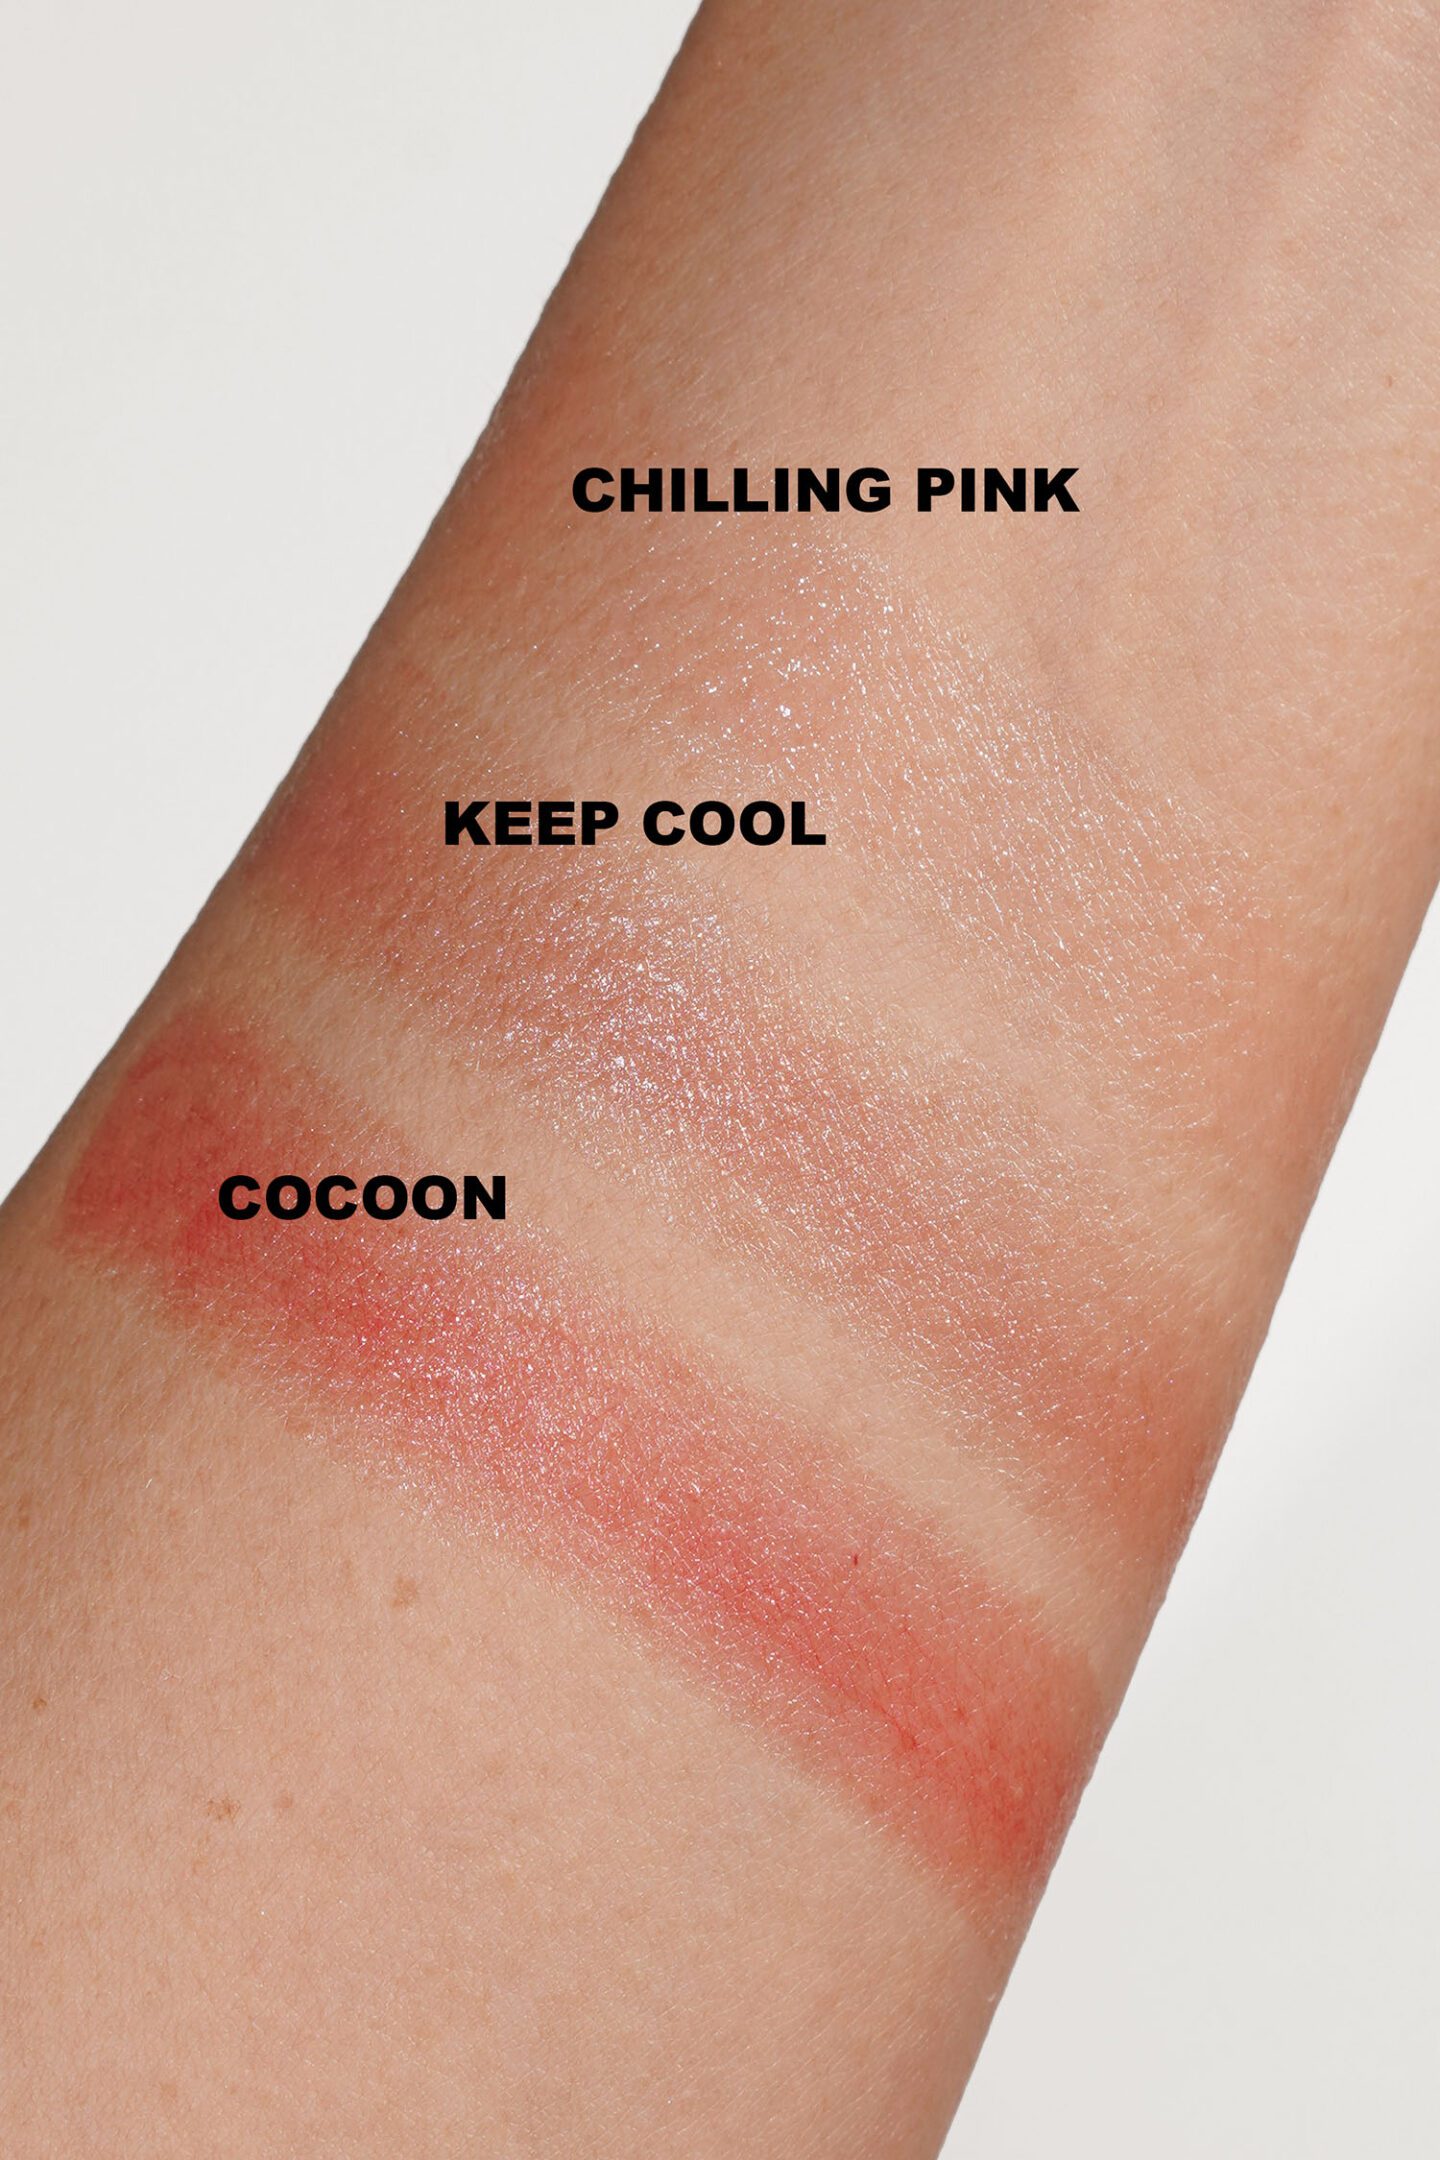 Chanel Rouge Coco Baume Chilling Pink, Keep Cool, Cocoon